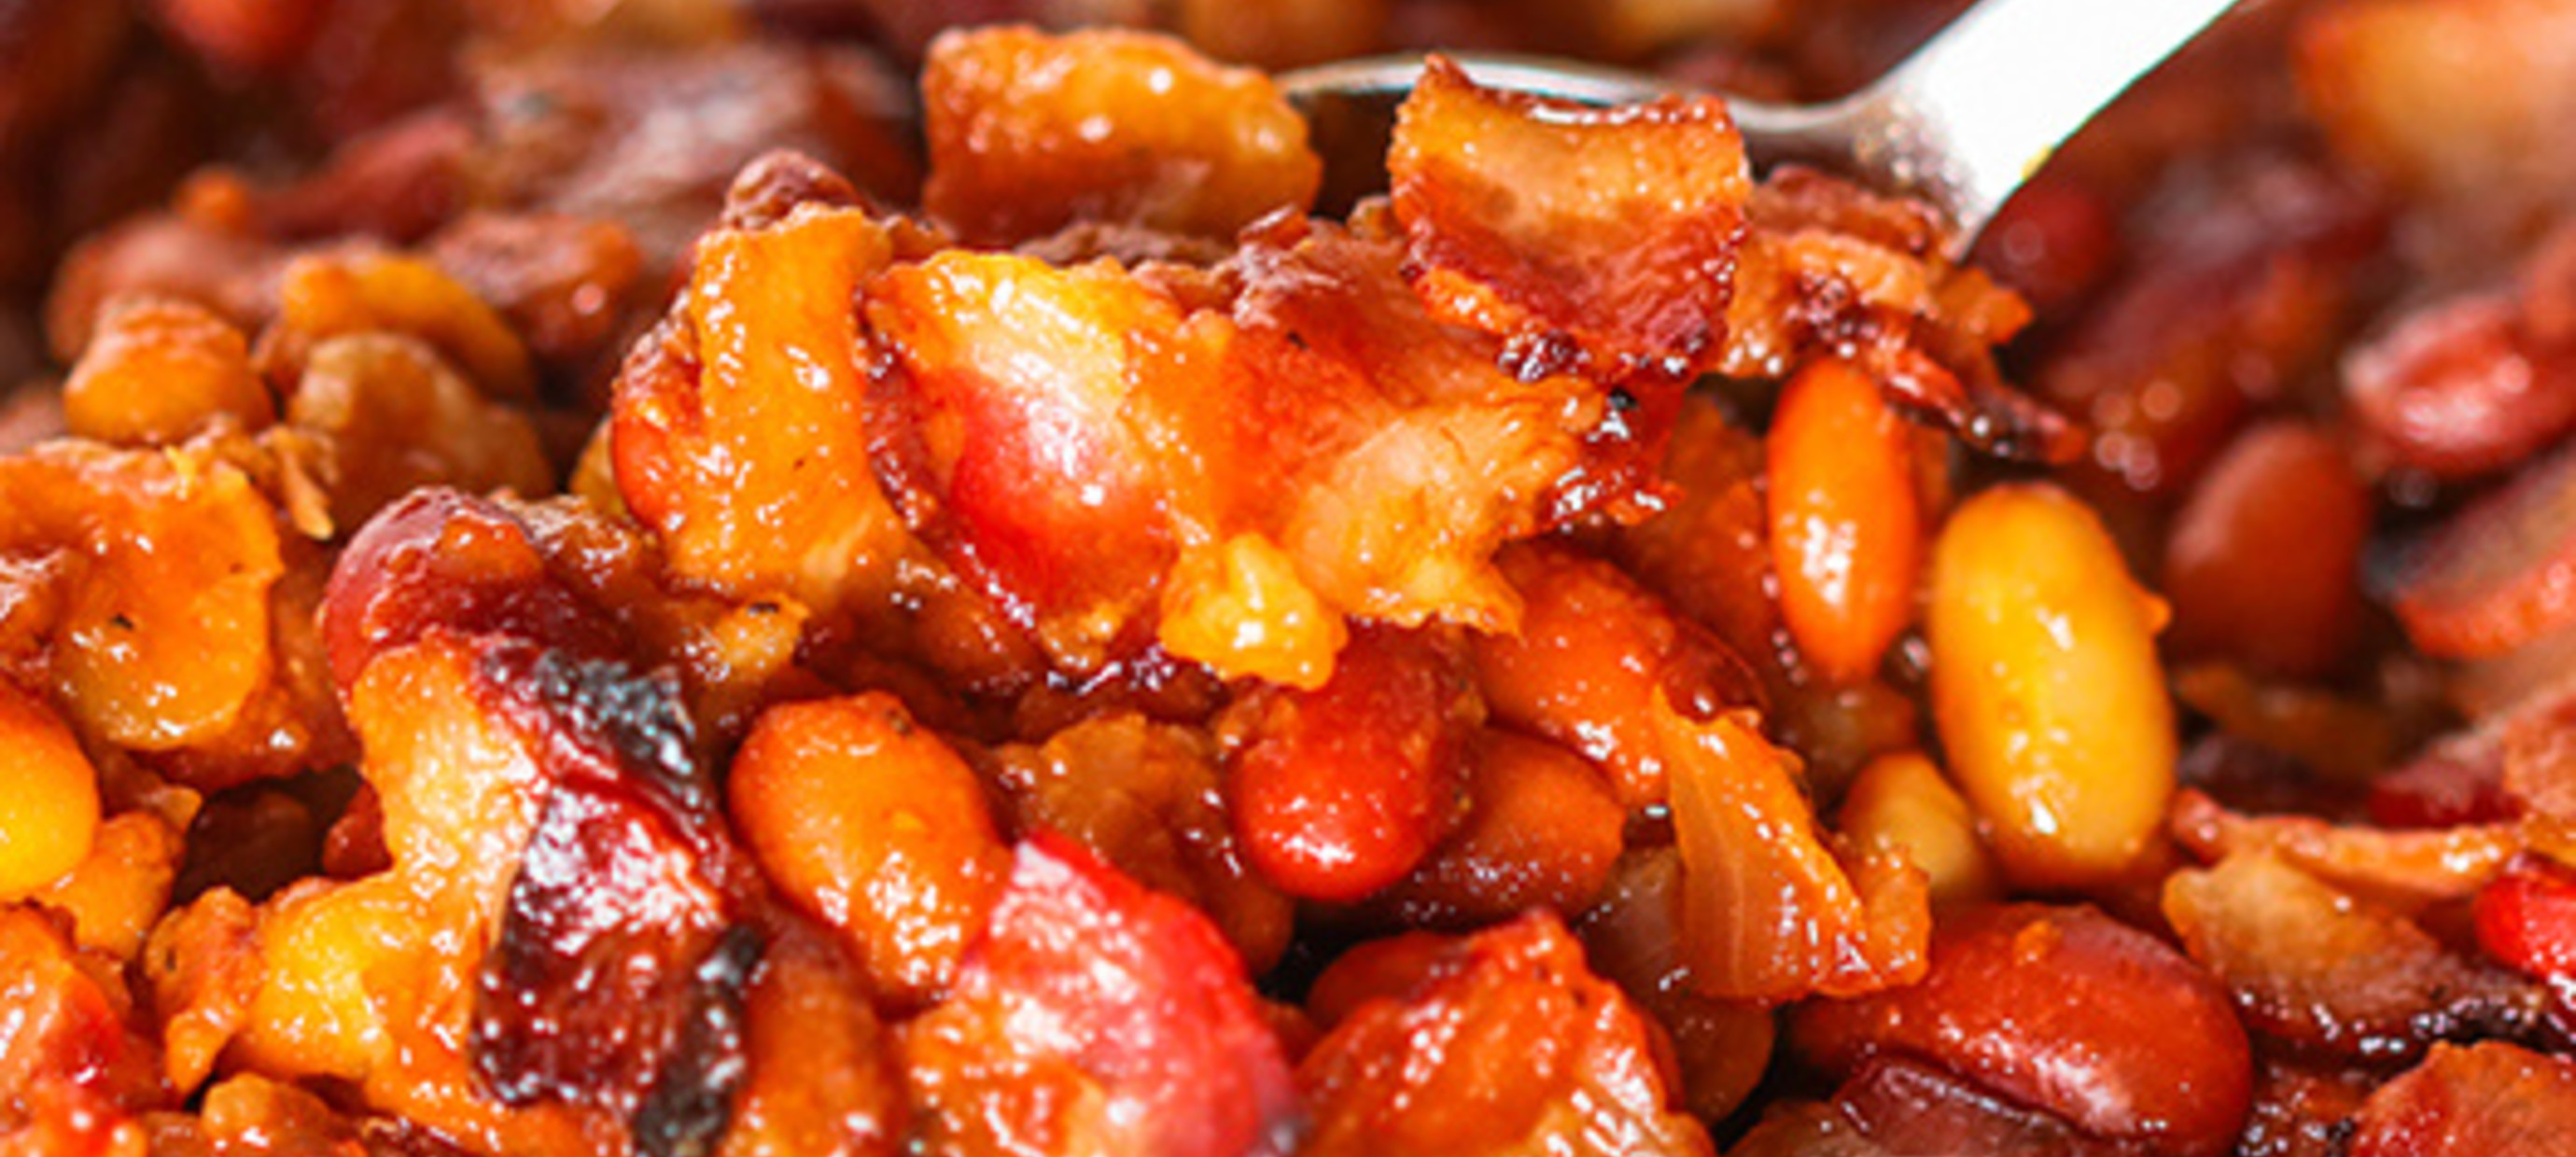 Boston BBQ Oven Baked Beans with Bacon